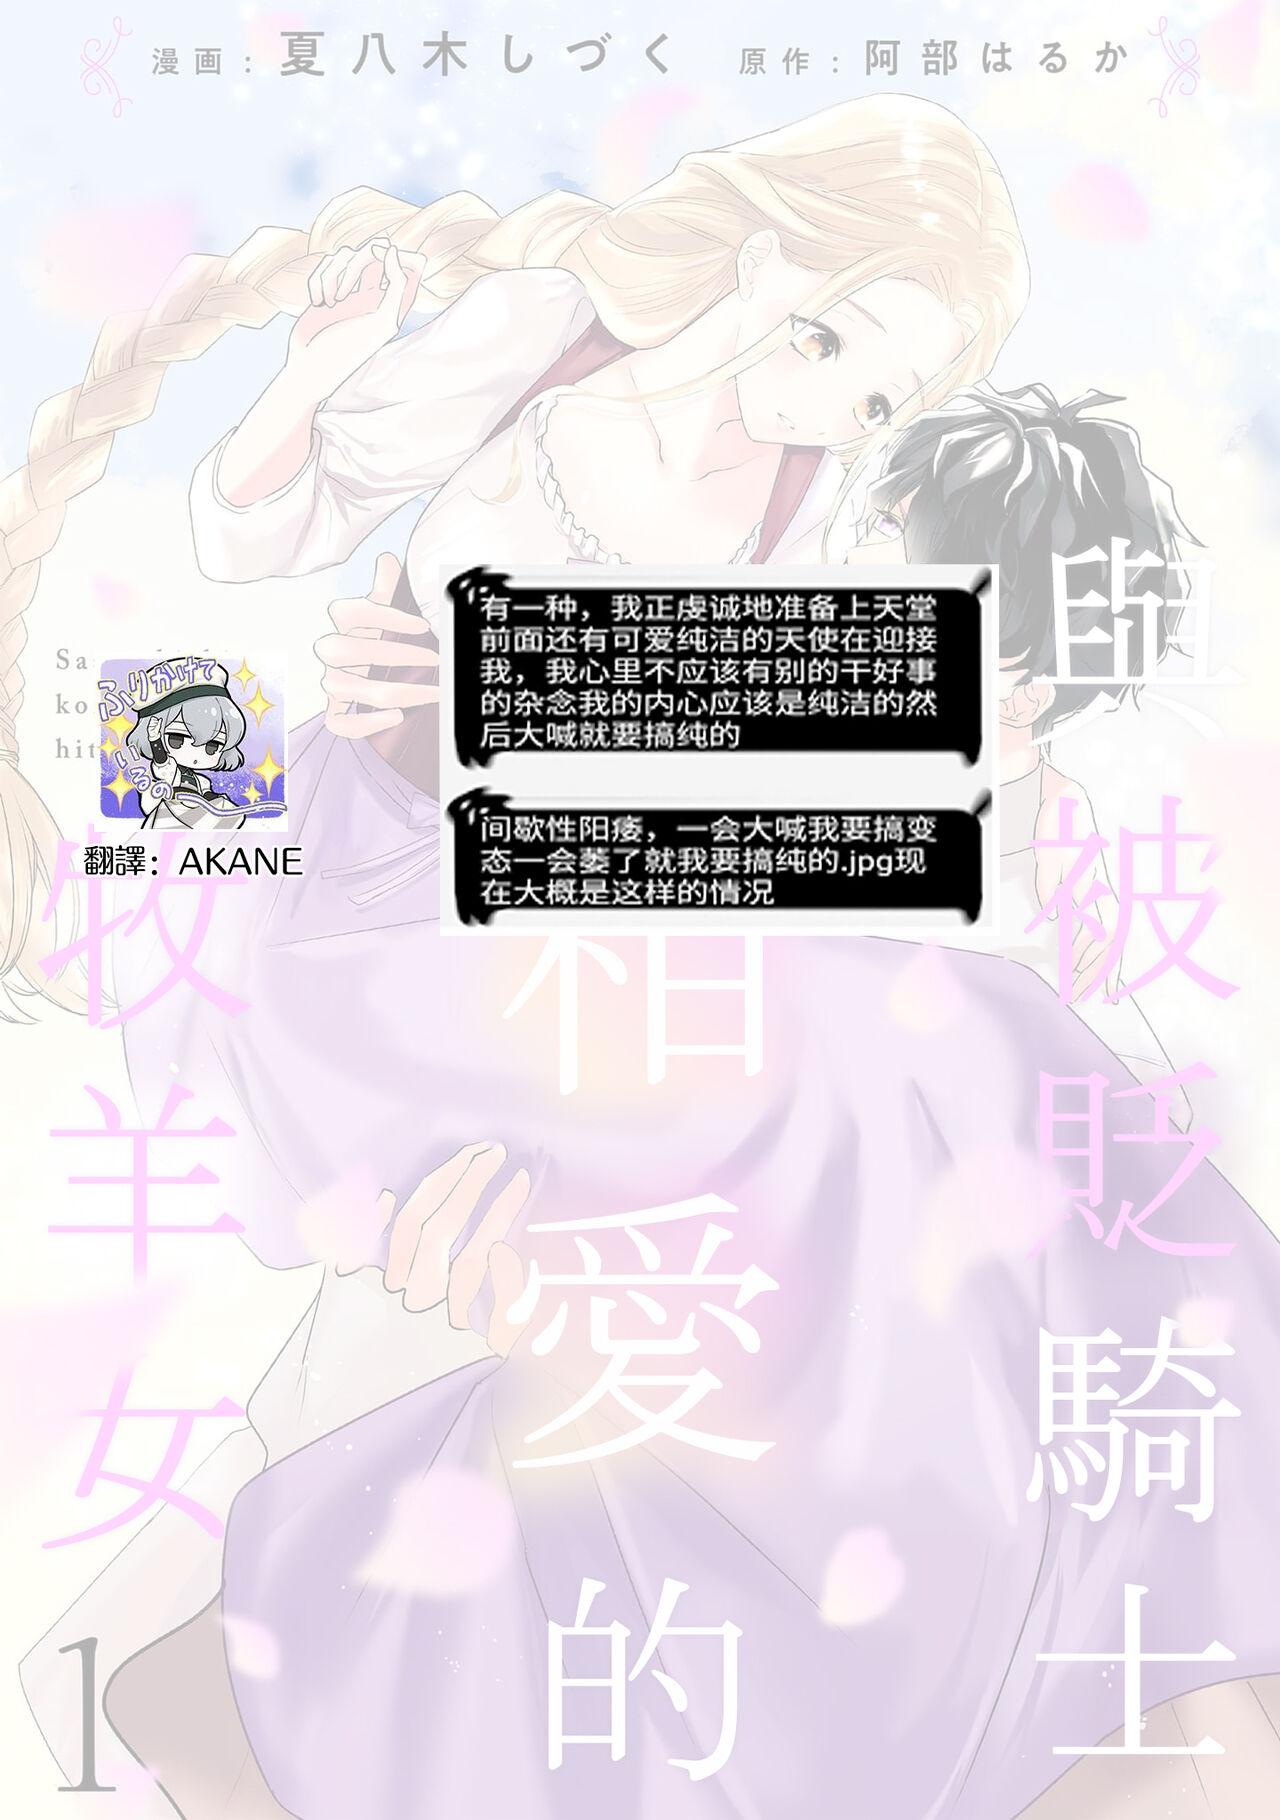 A shepherd in love with a demoted knight | 与被贬骑士相爱的牧羊女1 36